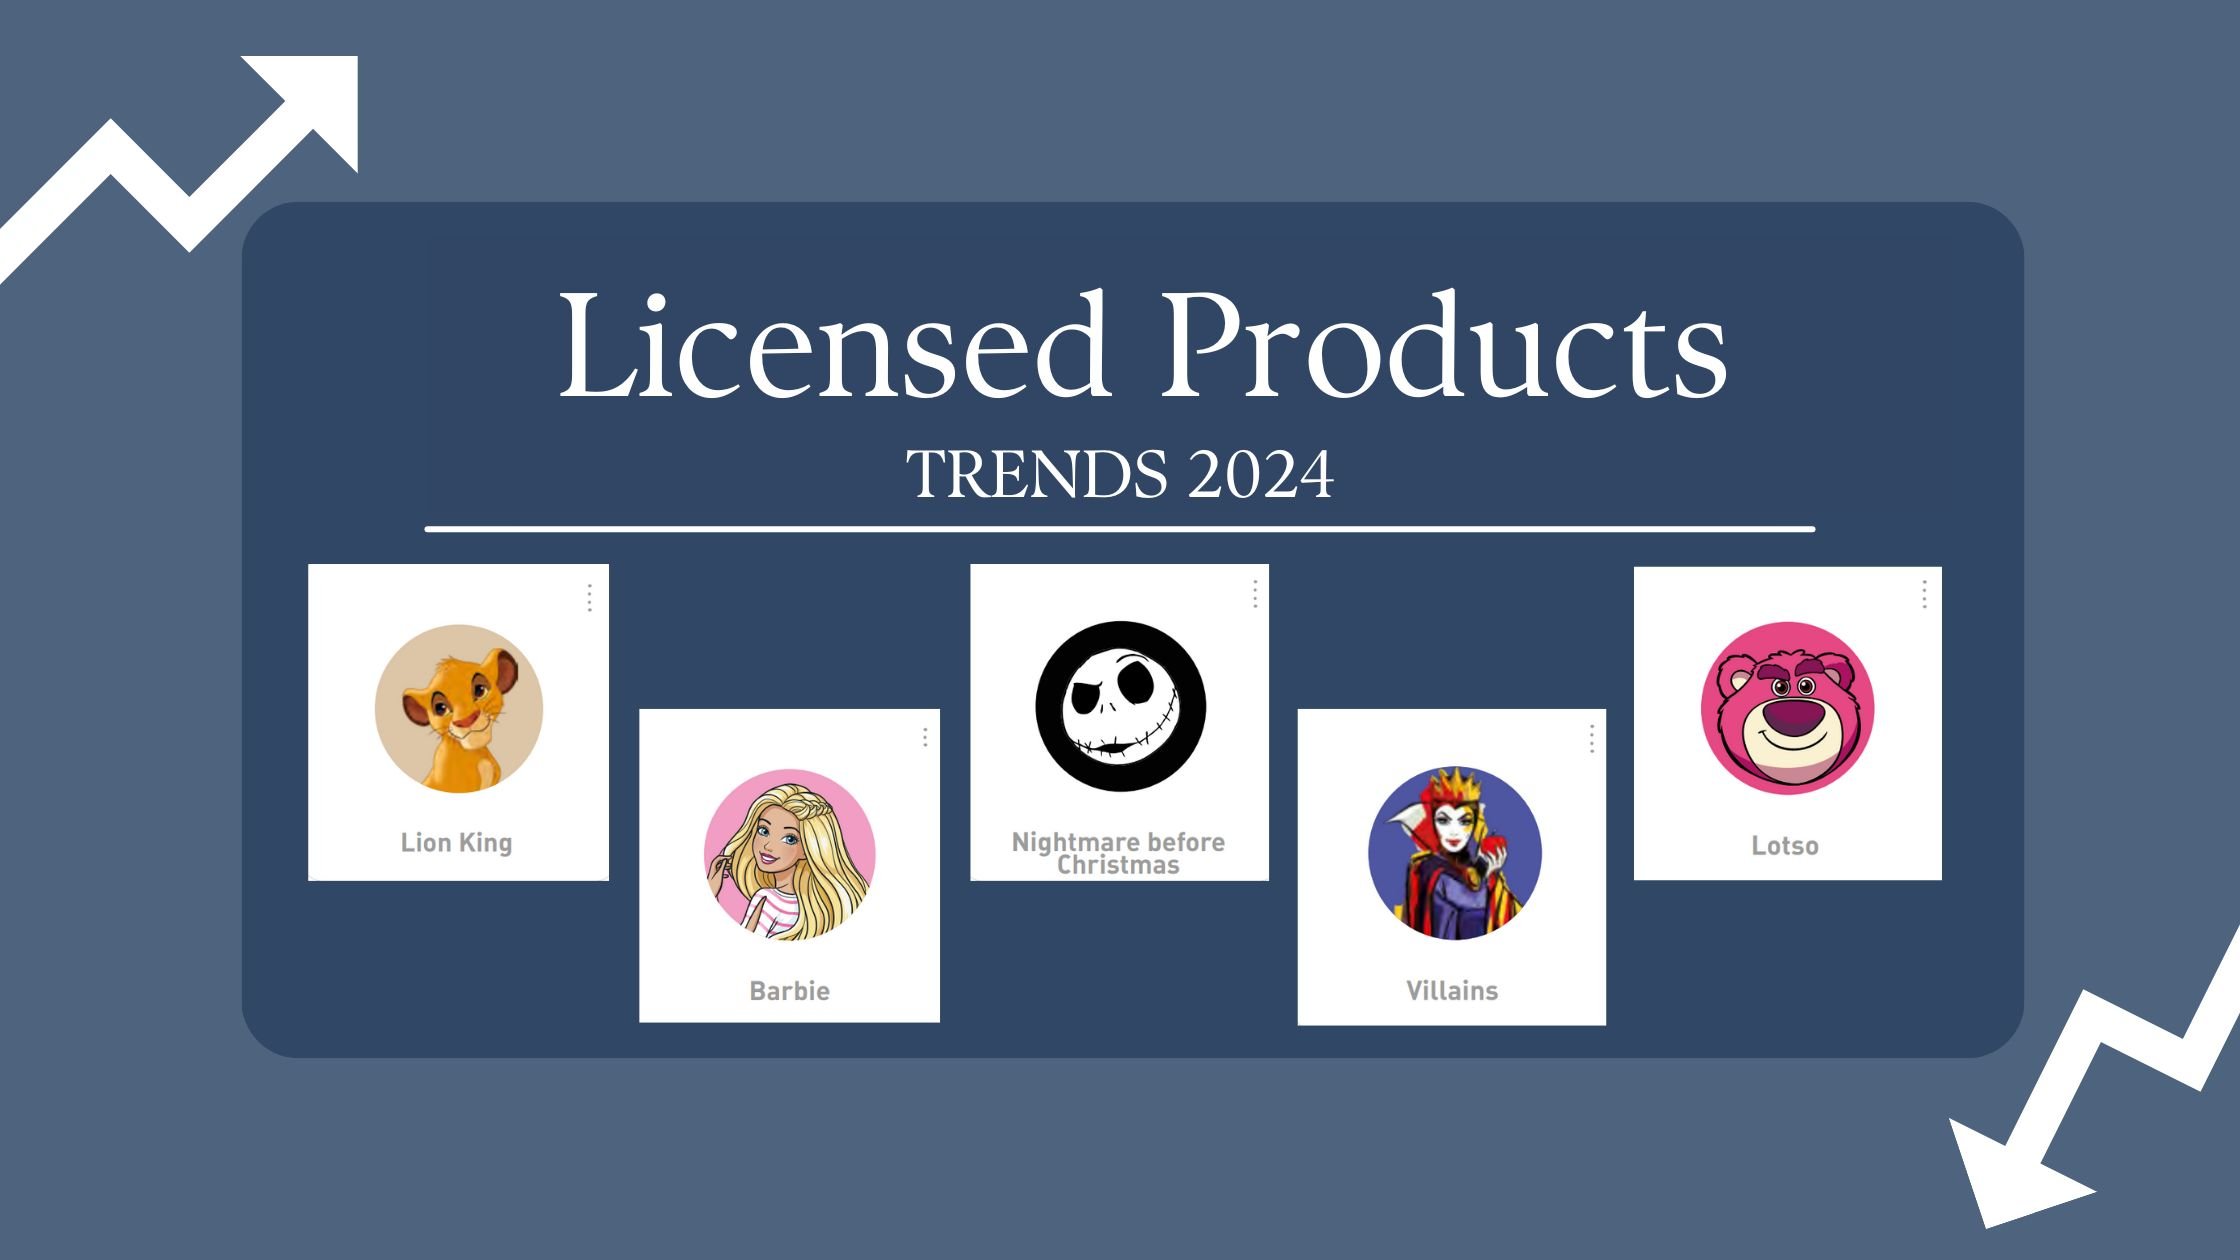 Trends 2024 in licensed products. Take note!